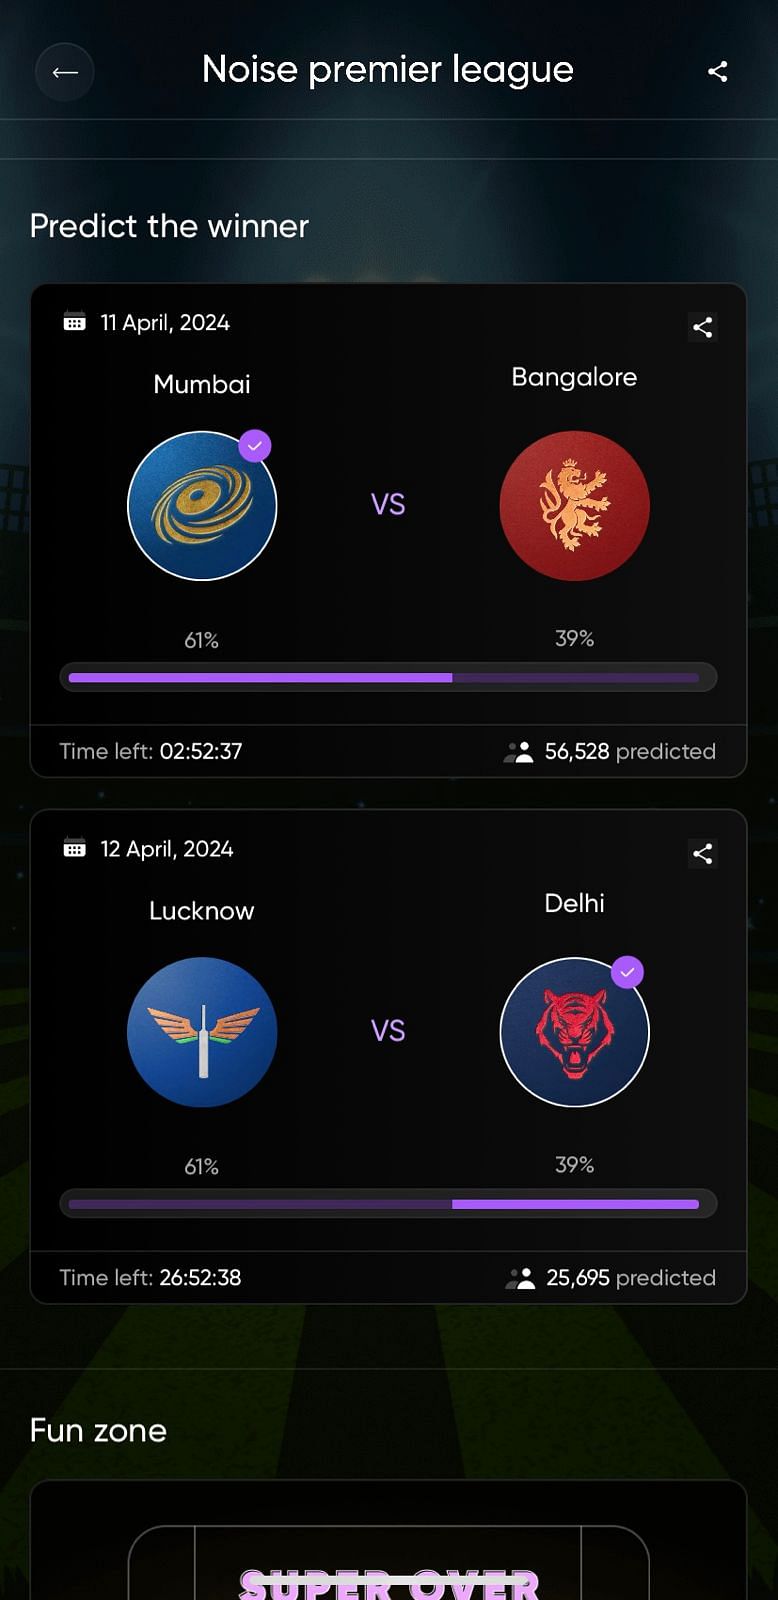 OYO's new campaign turns IPL match predictions into free stays and prizes